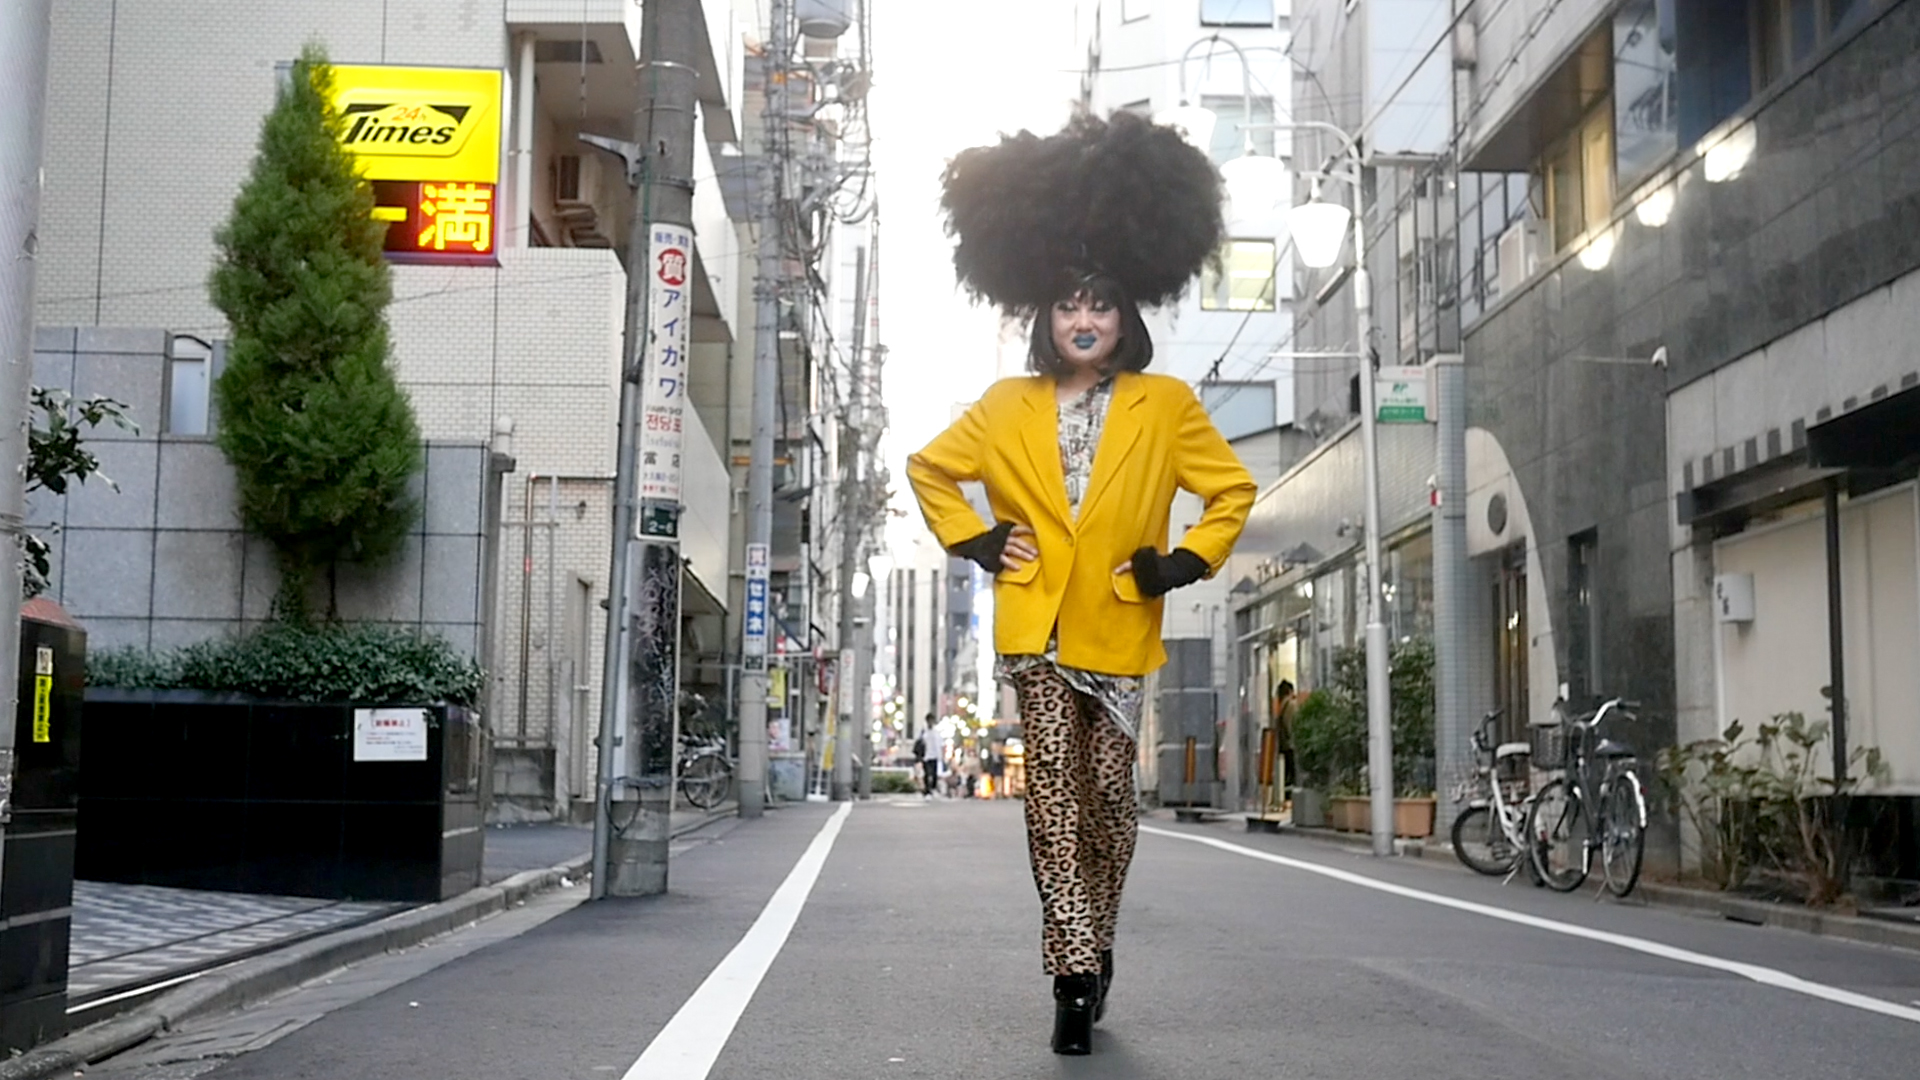 A drag queen stands in the streets of Tokyo, wearing big black hair and a yellow jacket. 